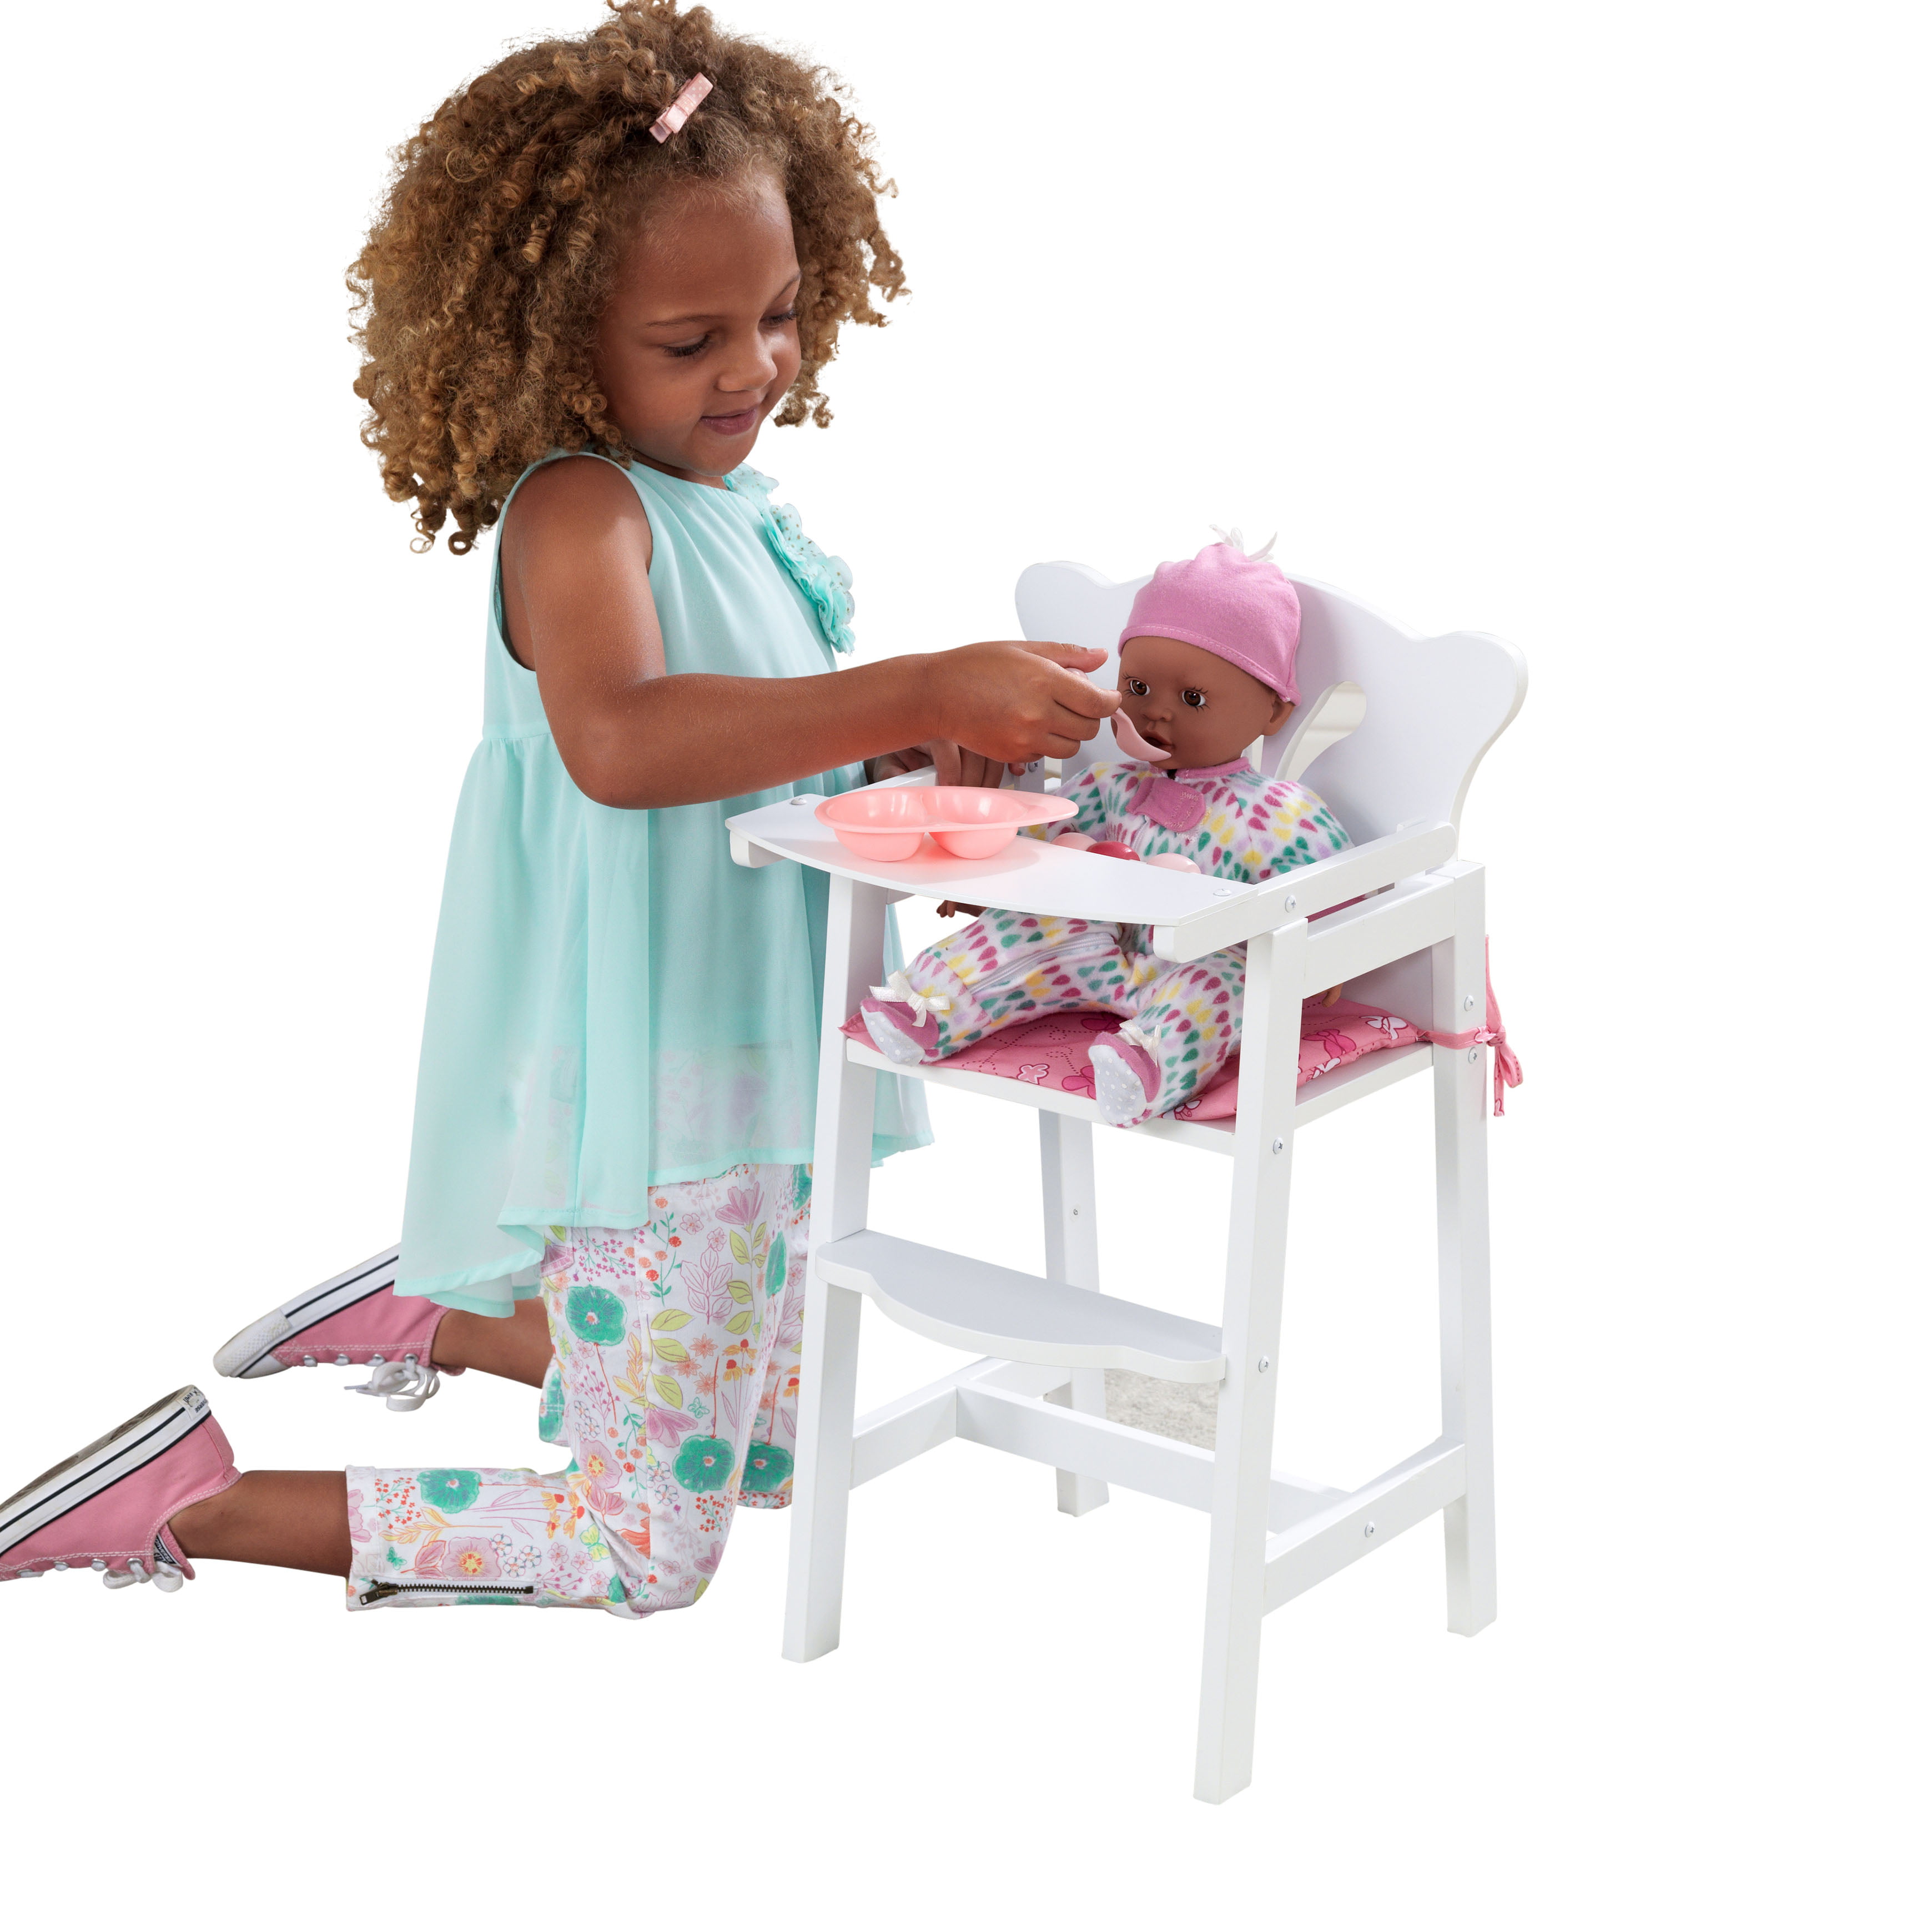 play high chairs for dolls